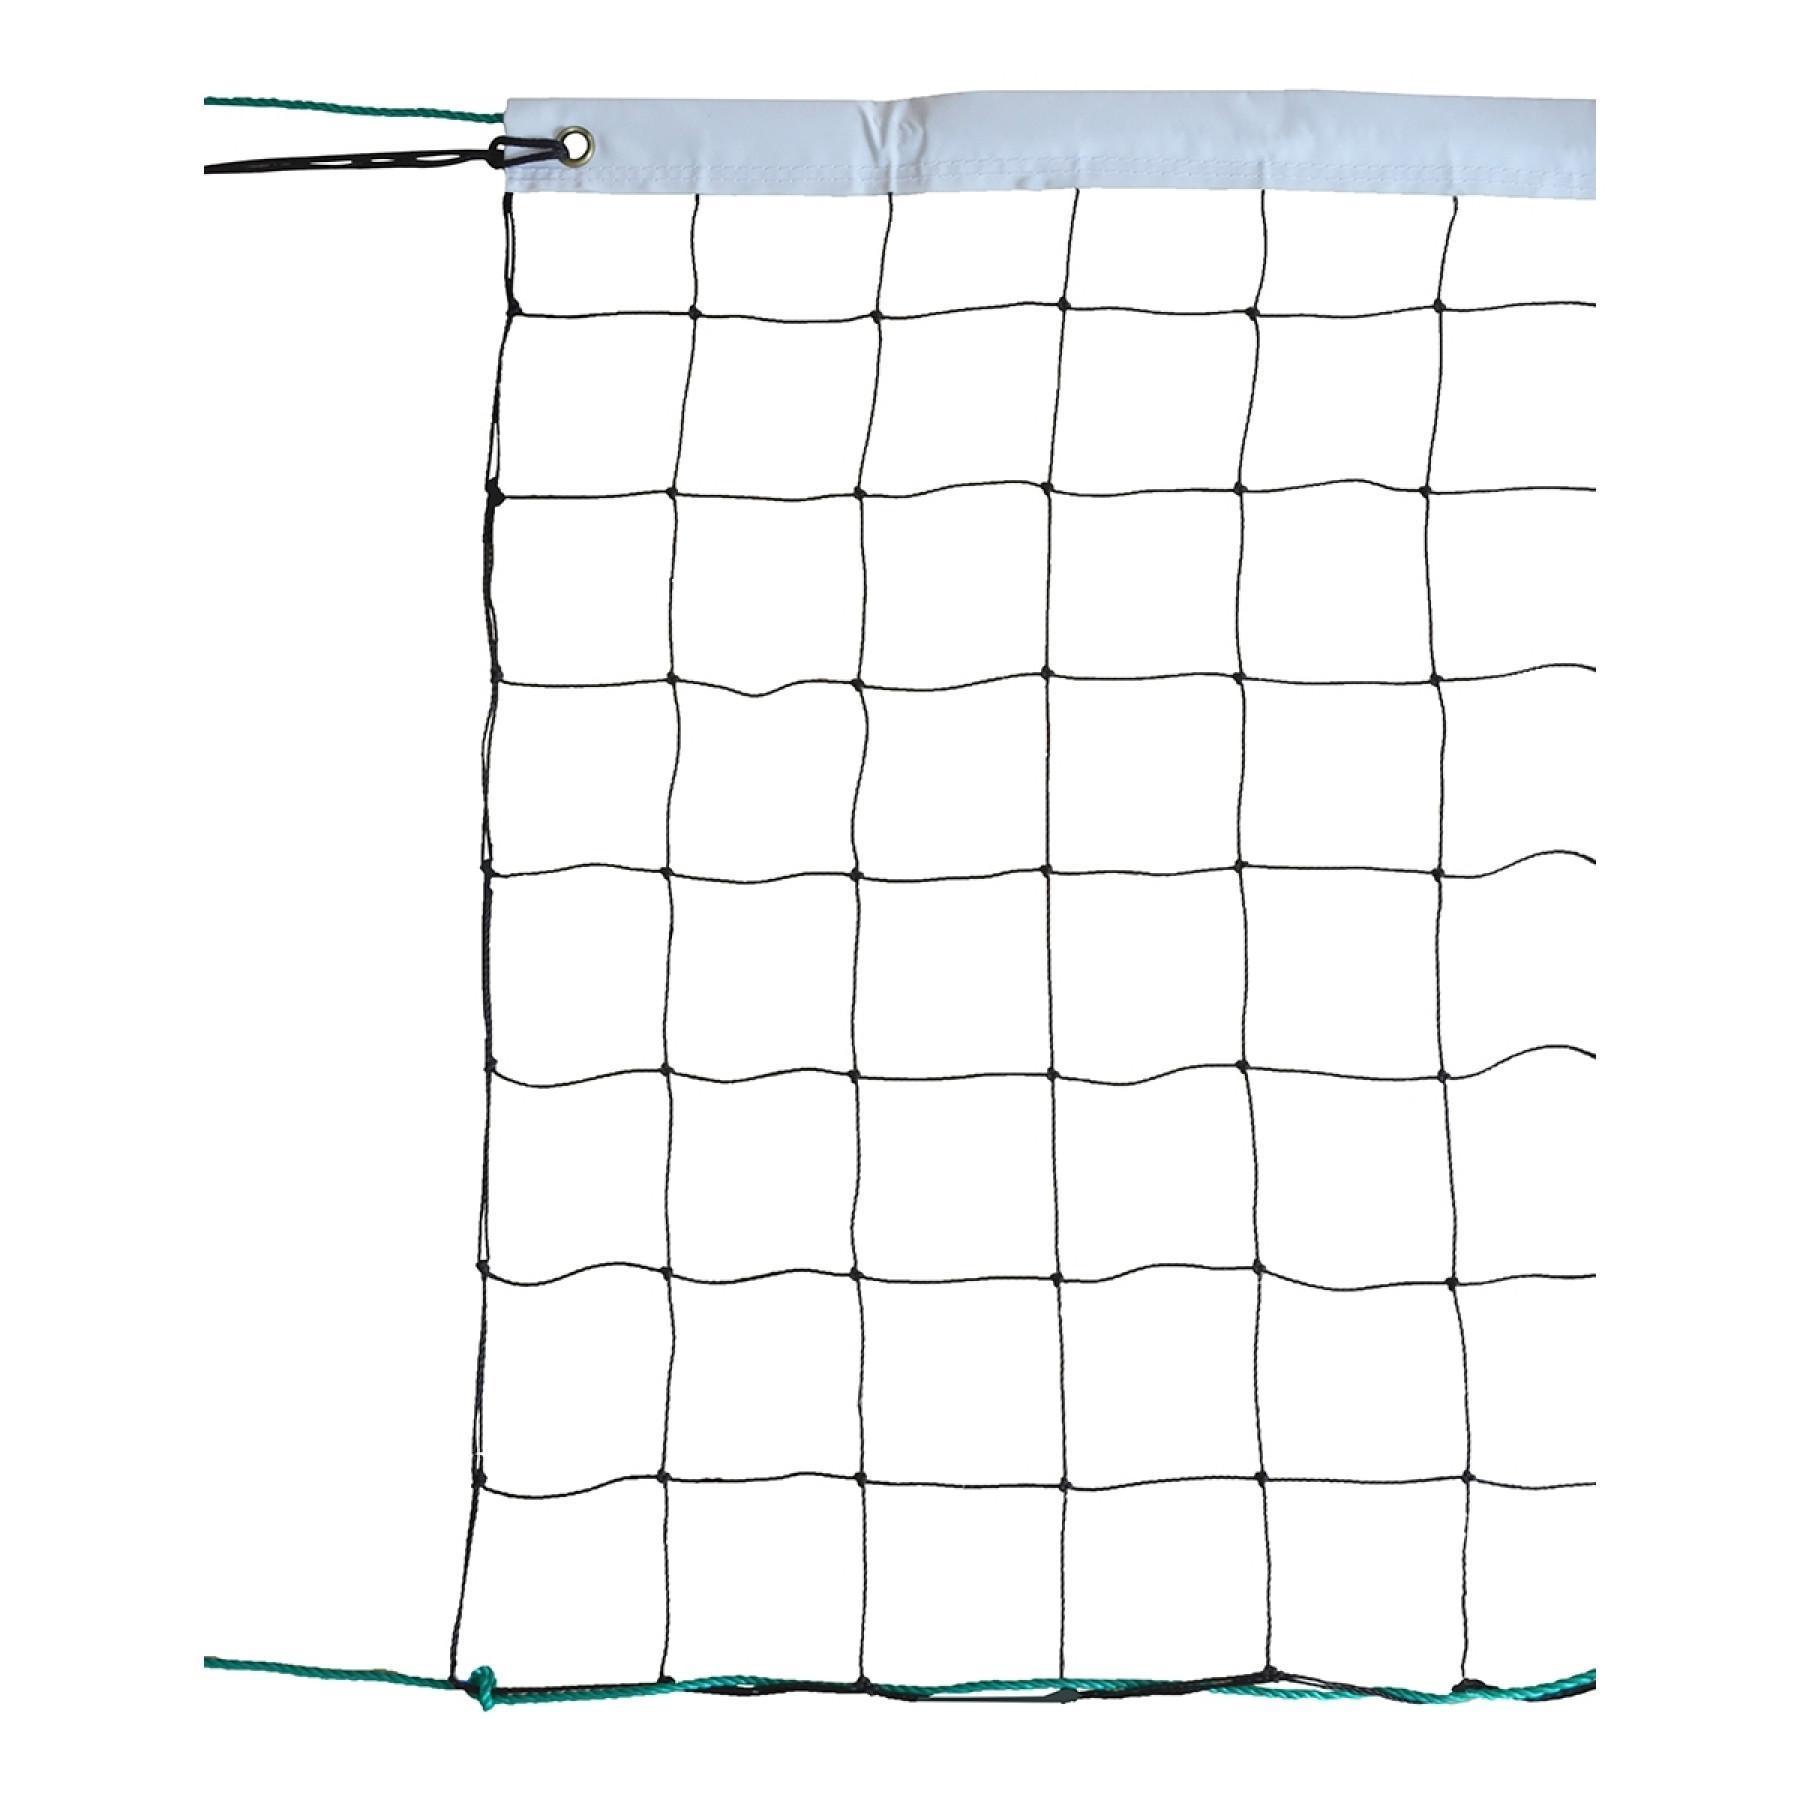 School volleyball net 9x0.80m pe cabled 2mm single mesh 100 Sporti France